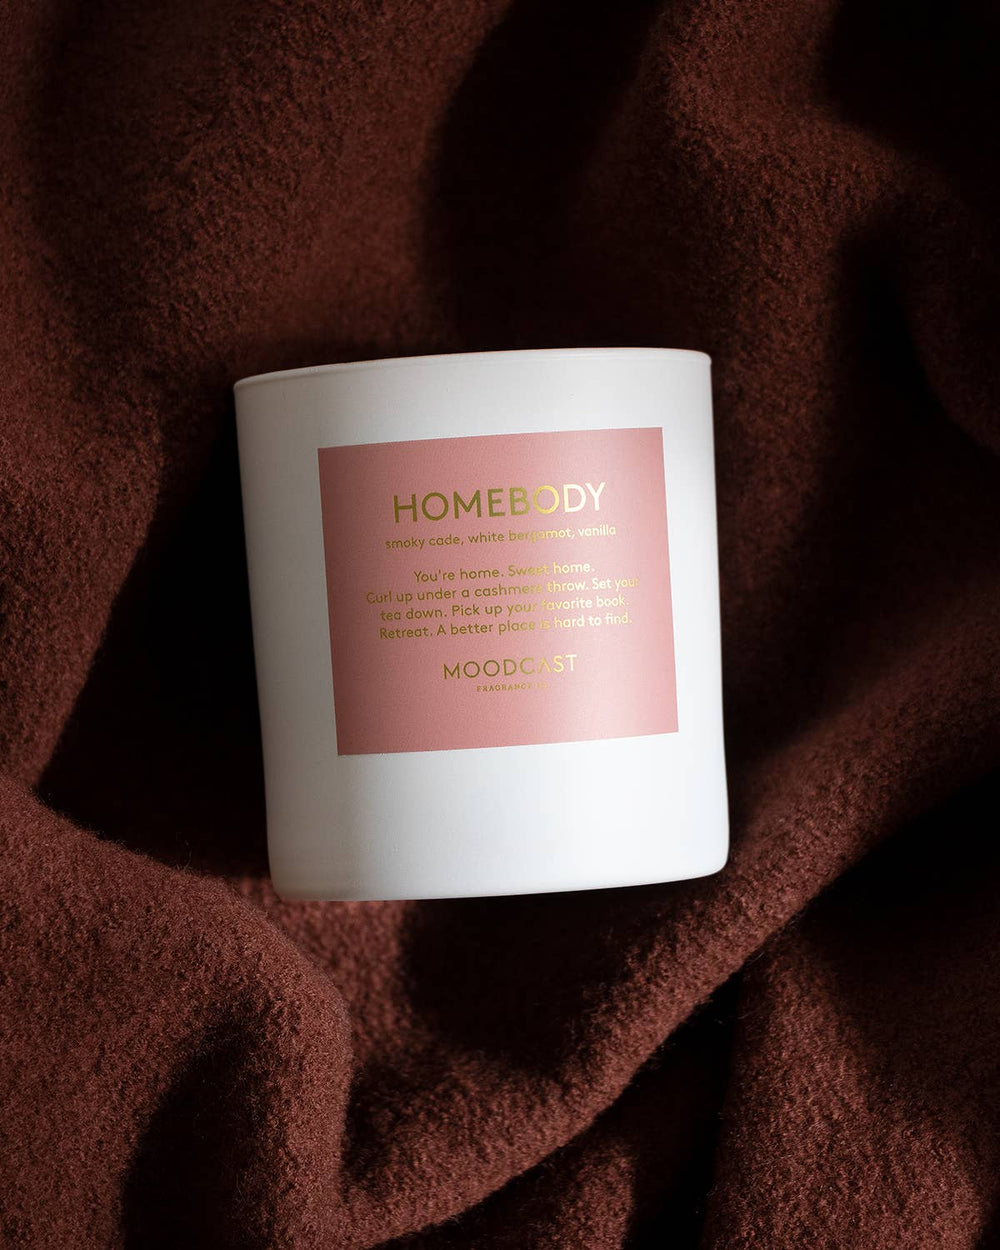 Homebody - White/Gold 8oz Coconut Wax Candle - The Floratory